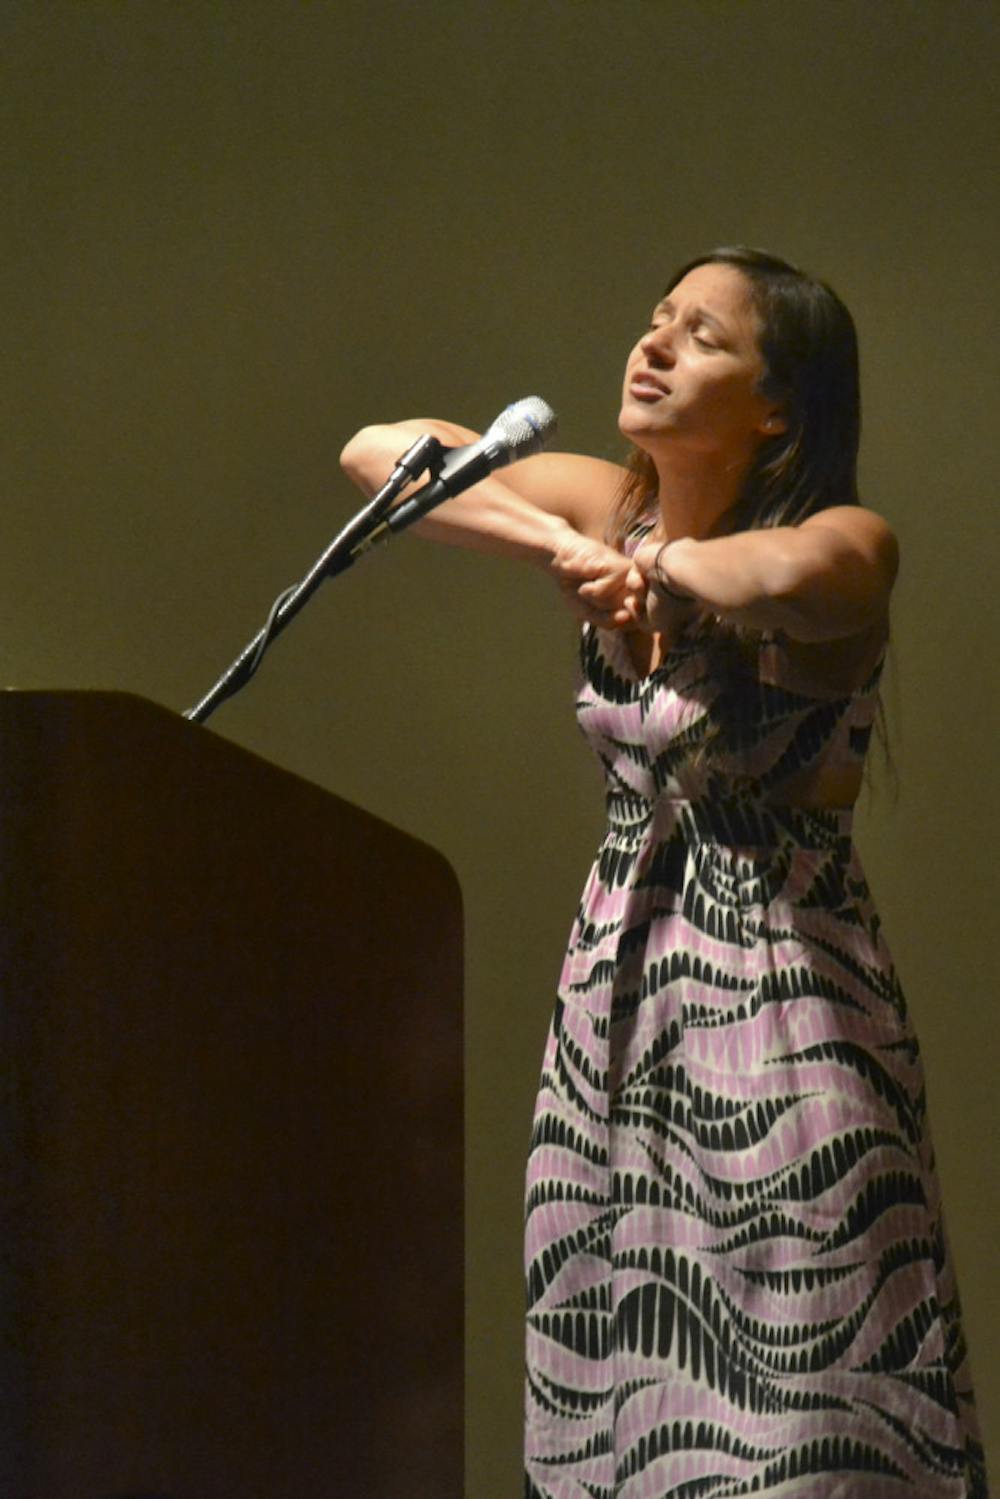 <p>Gabriela Garcia Medina, an international artist and spoken word poet, performs her poem “Self-Empowered Love Poem” during the Hispanic Heritage Month opening ceremony at Emerson Alumni Hall Sept. 14, 2015. Her poem challenged the idea of unhealthy dependent relationships that are promoted in popular music. “I wanted to write a poem of love songs and turn it into something empowering,” Medina said during her speech.</p>